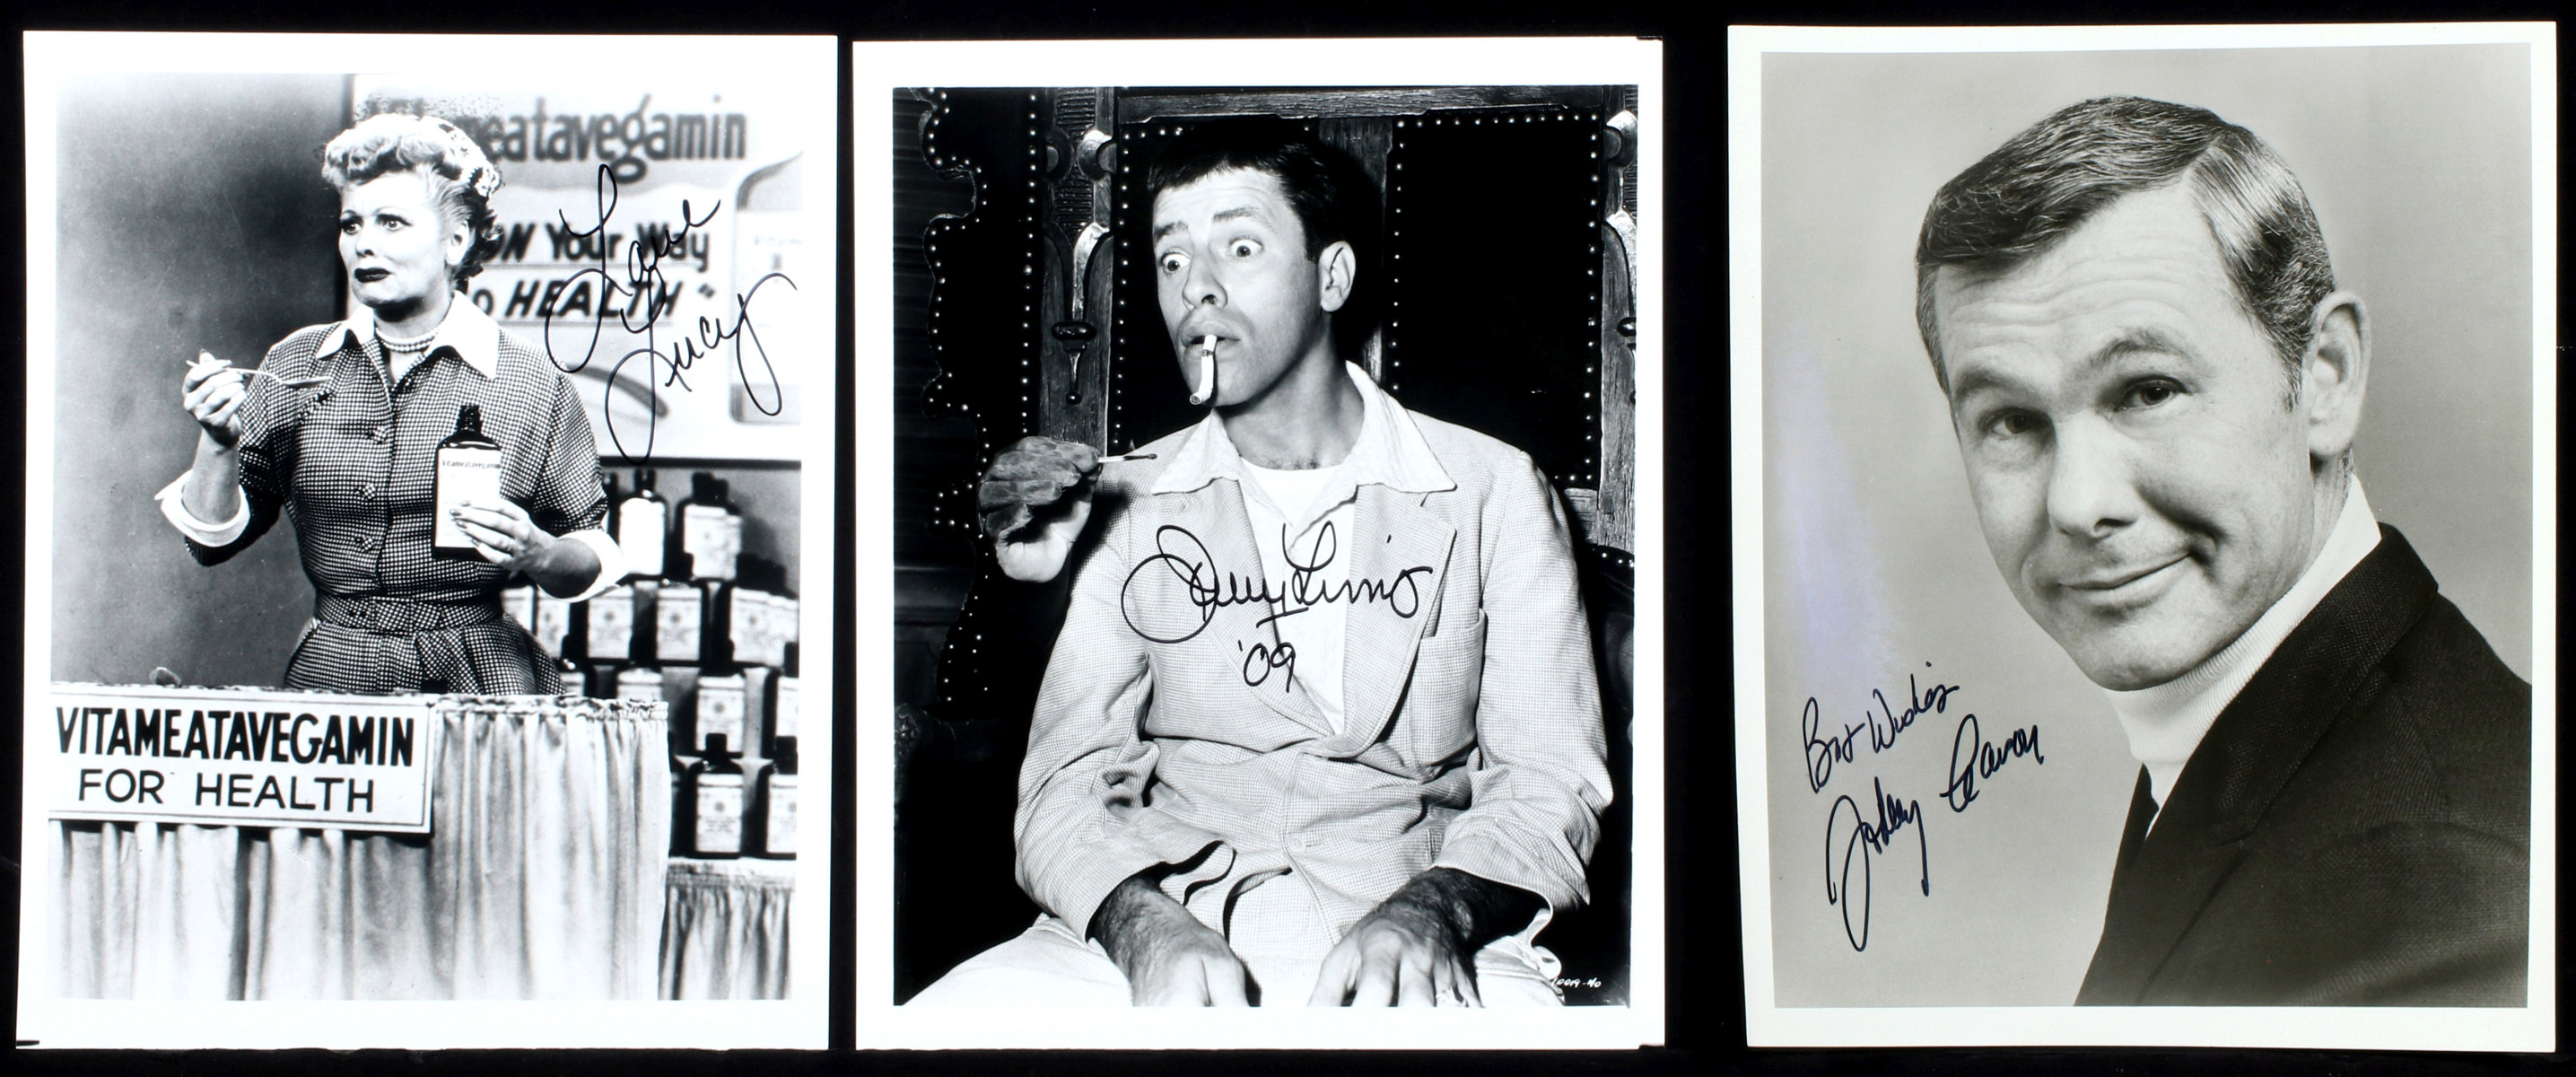 CLASSIC TV PERSONALITIES SIGNED 8 X 10 PHOTOS